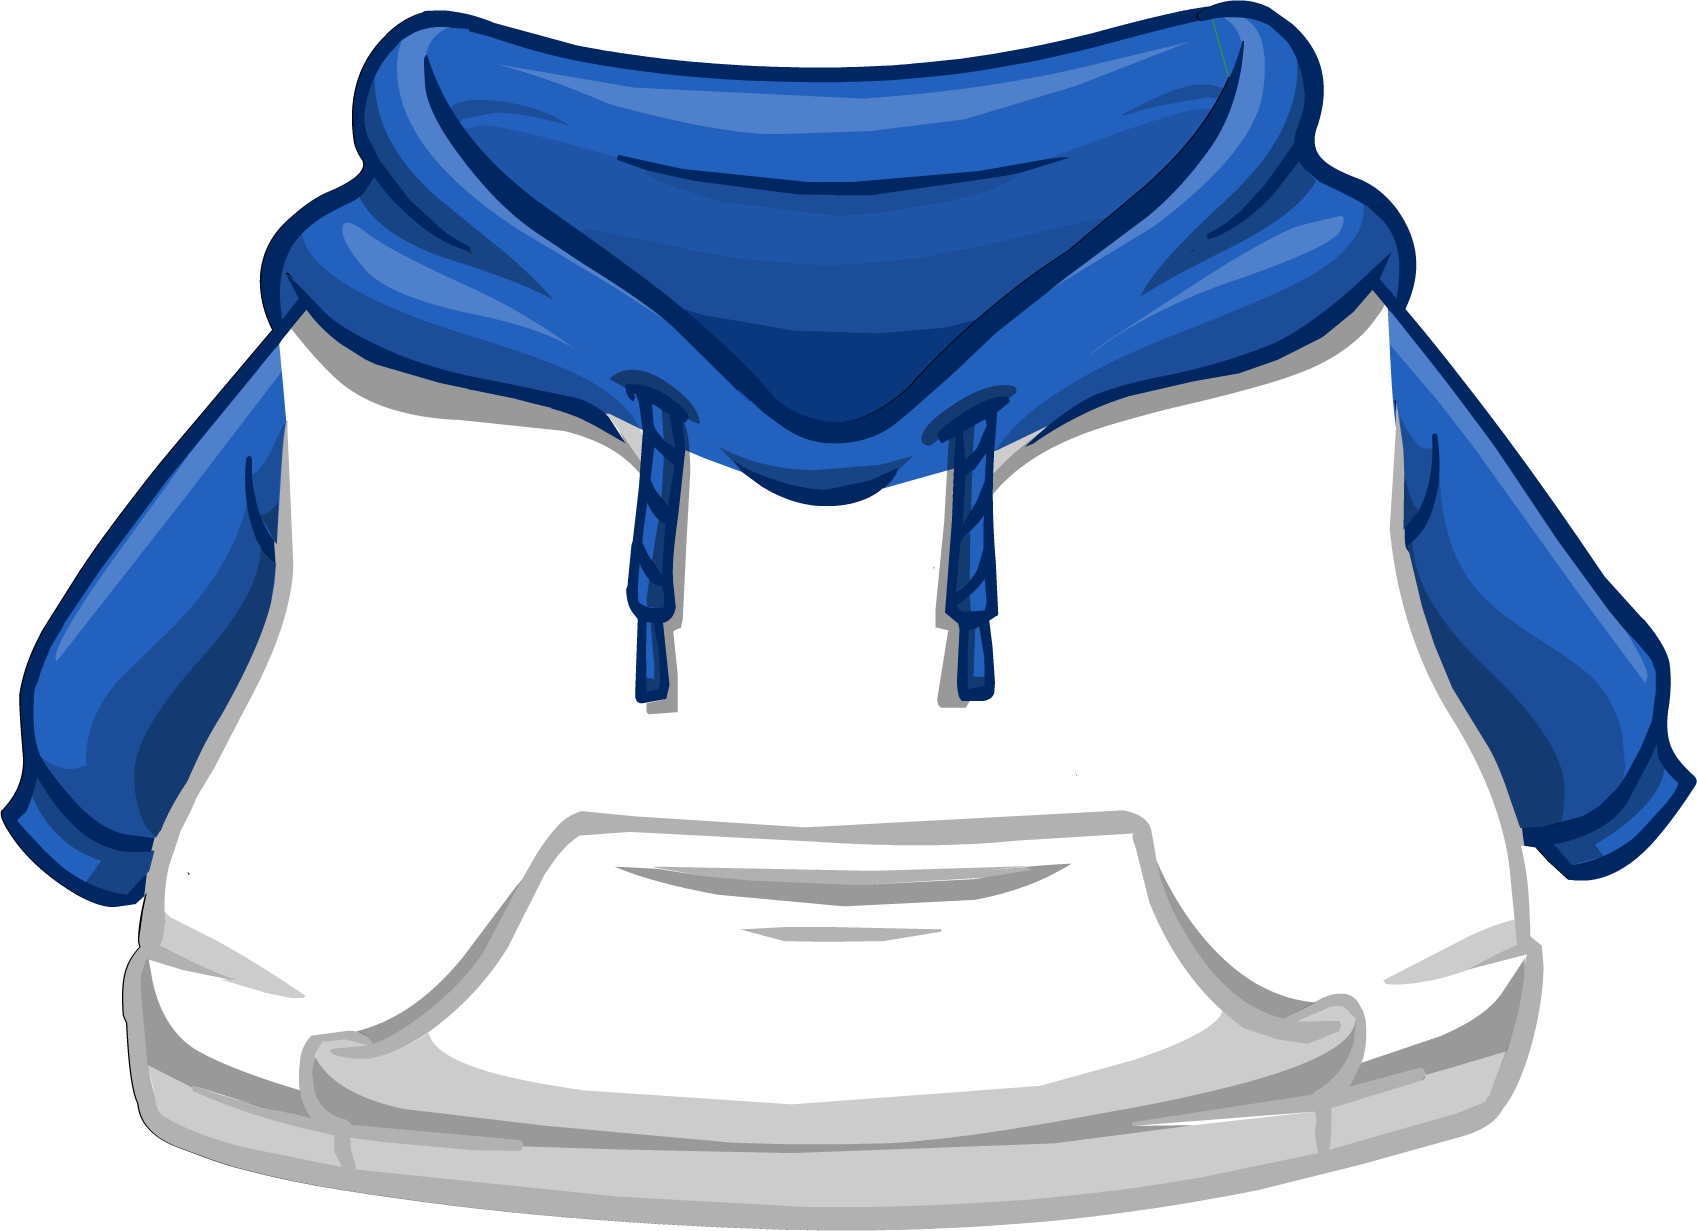 Blue And White Two - Club Penguin Hoodie (1697x1231)